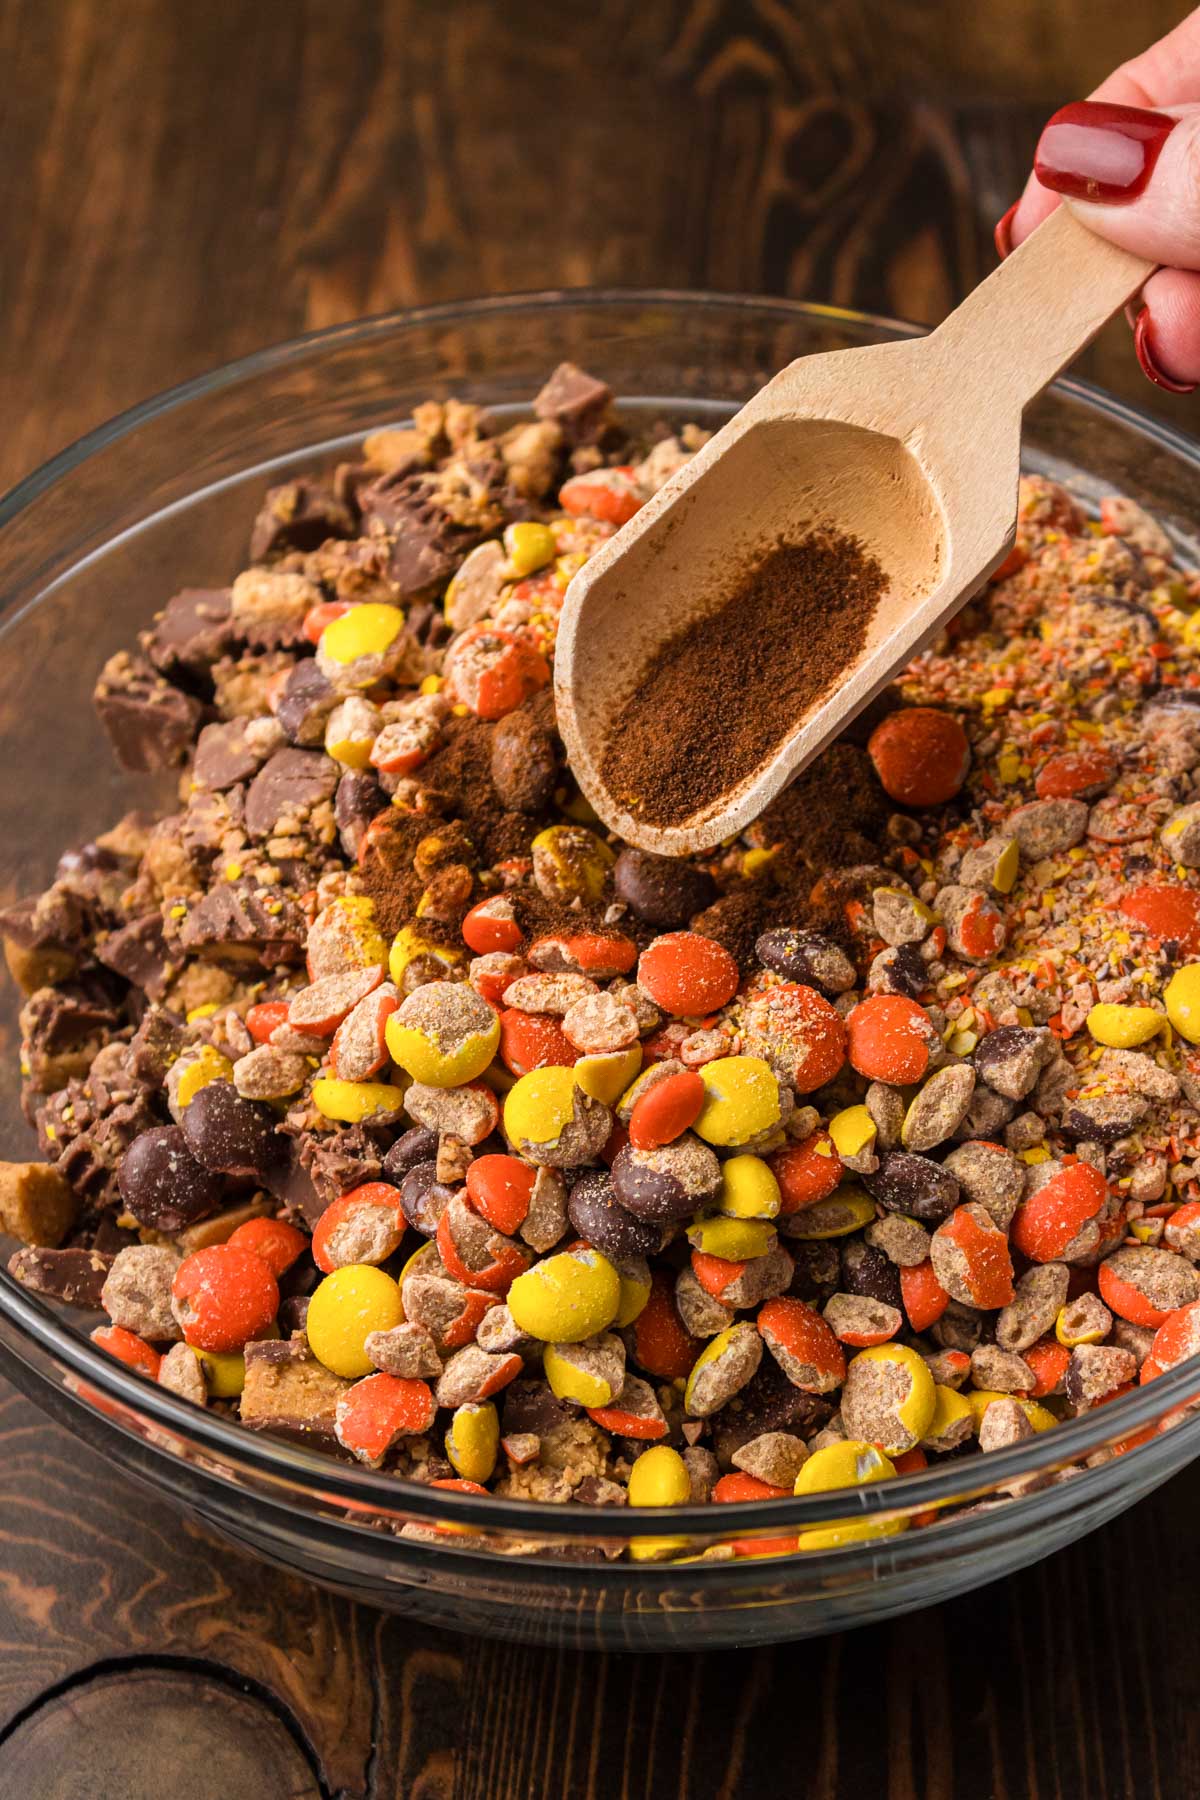 Ground espresso being added to a bowl of reese's pieces and chopped peanut butter cups.